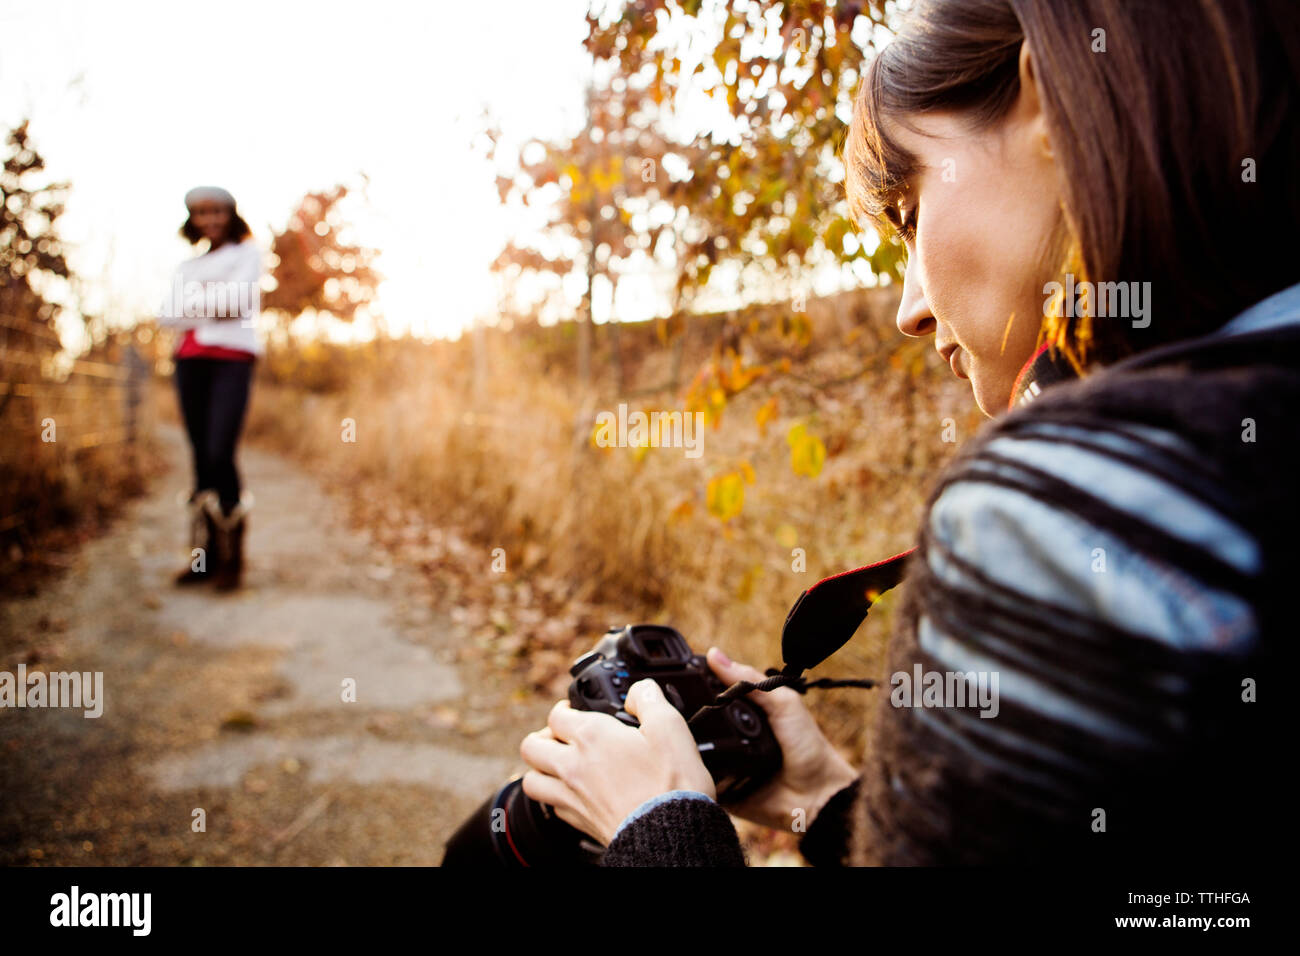 Woman looking at photographs in digital camera while friend posing on footpath Stock Photo